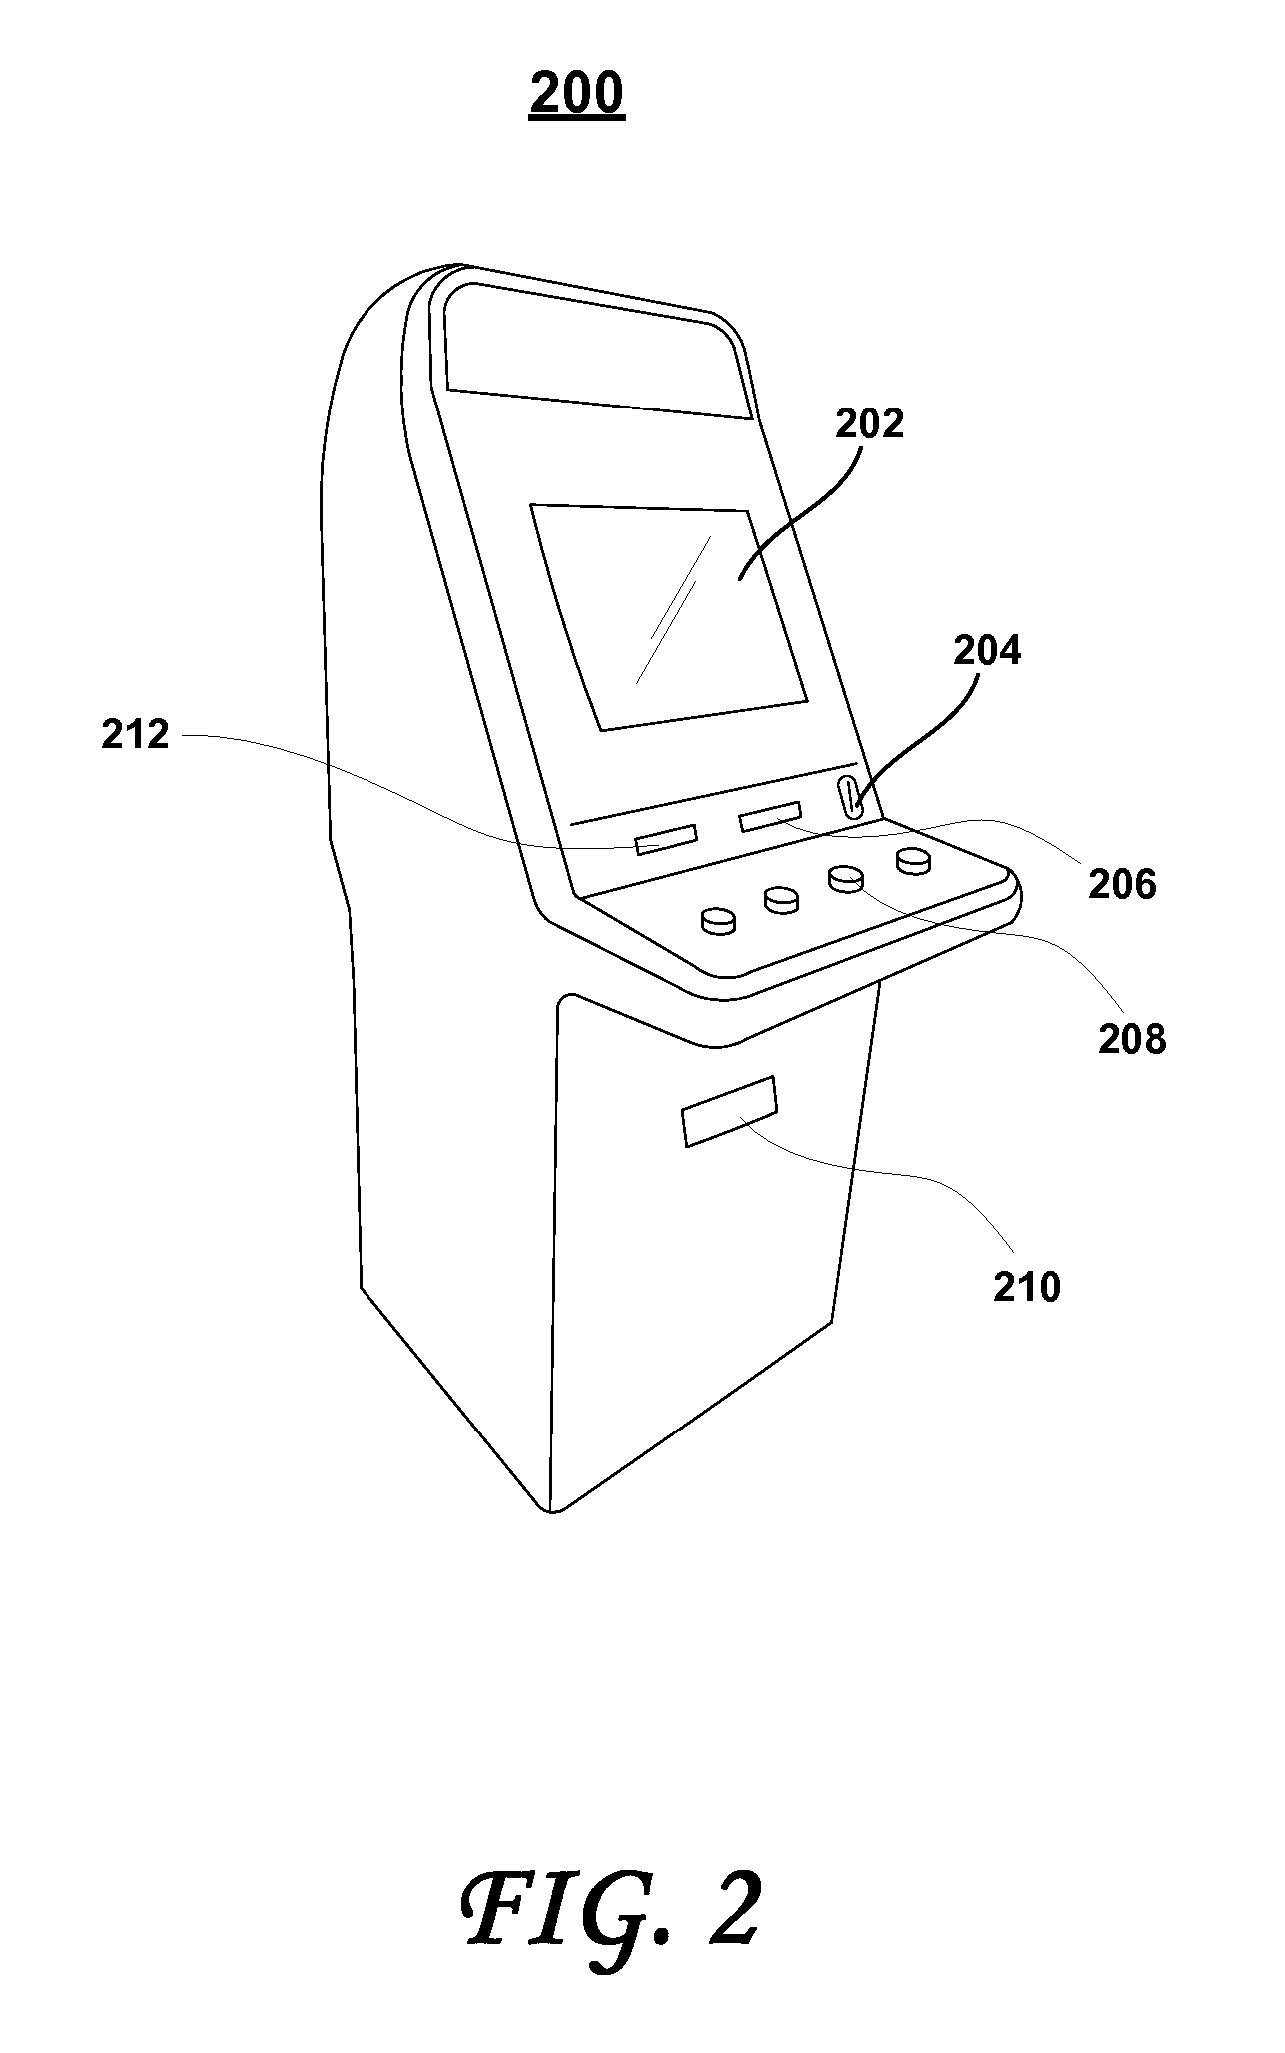 Modular entertainment and gaming systems configured to consume and provide network services